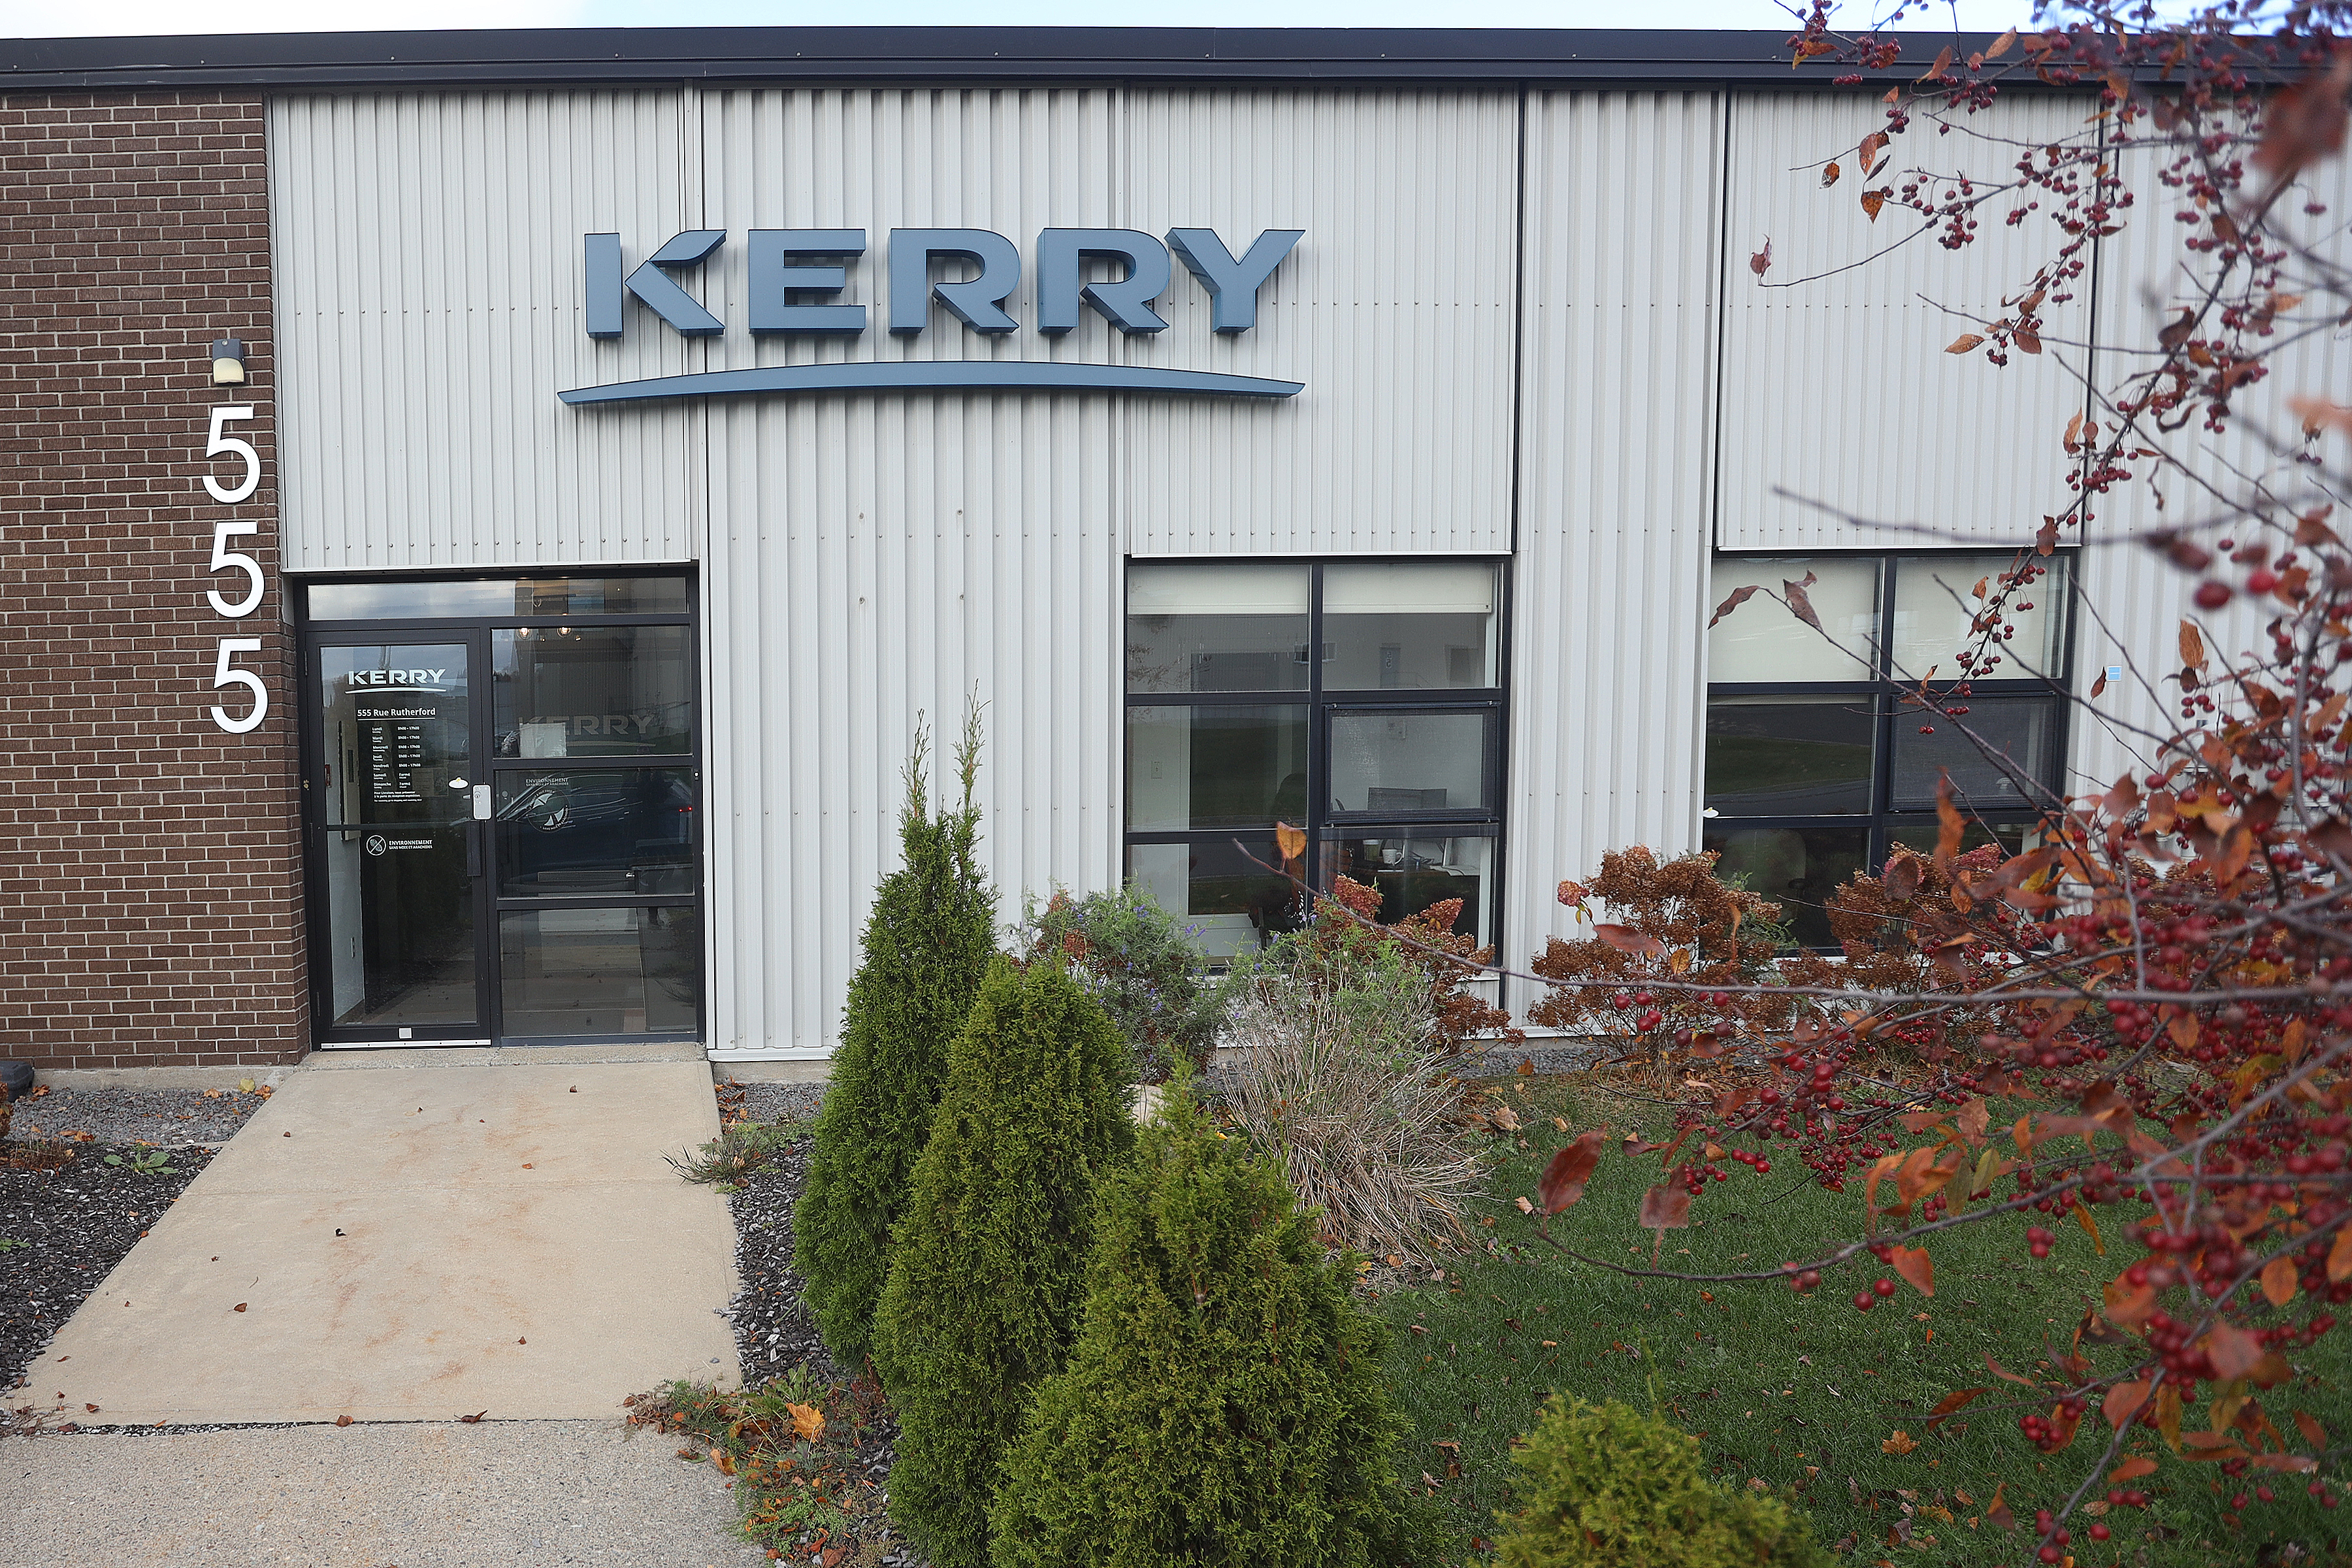 Kerry Usine Granby B. Sur le rue Rutherford.